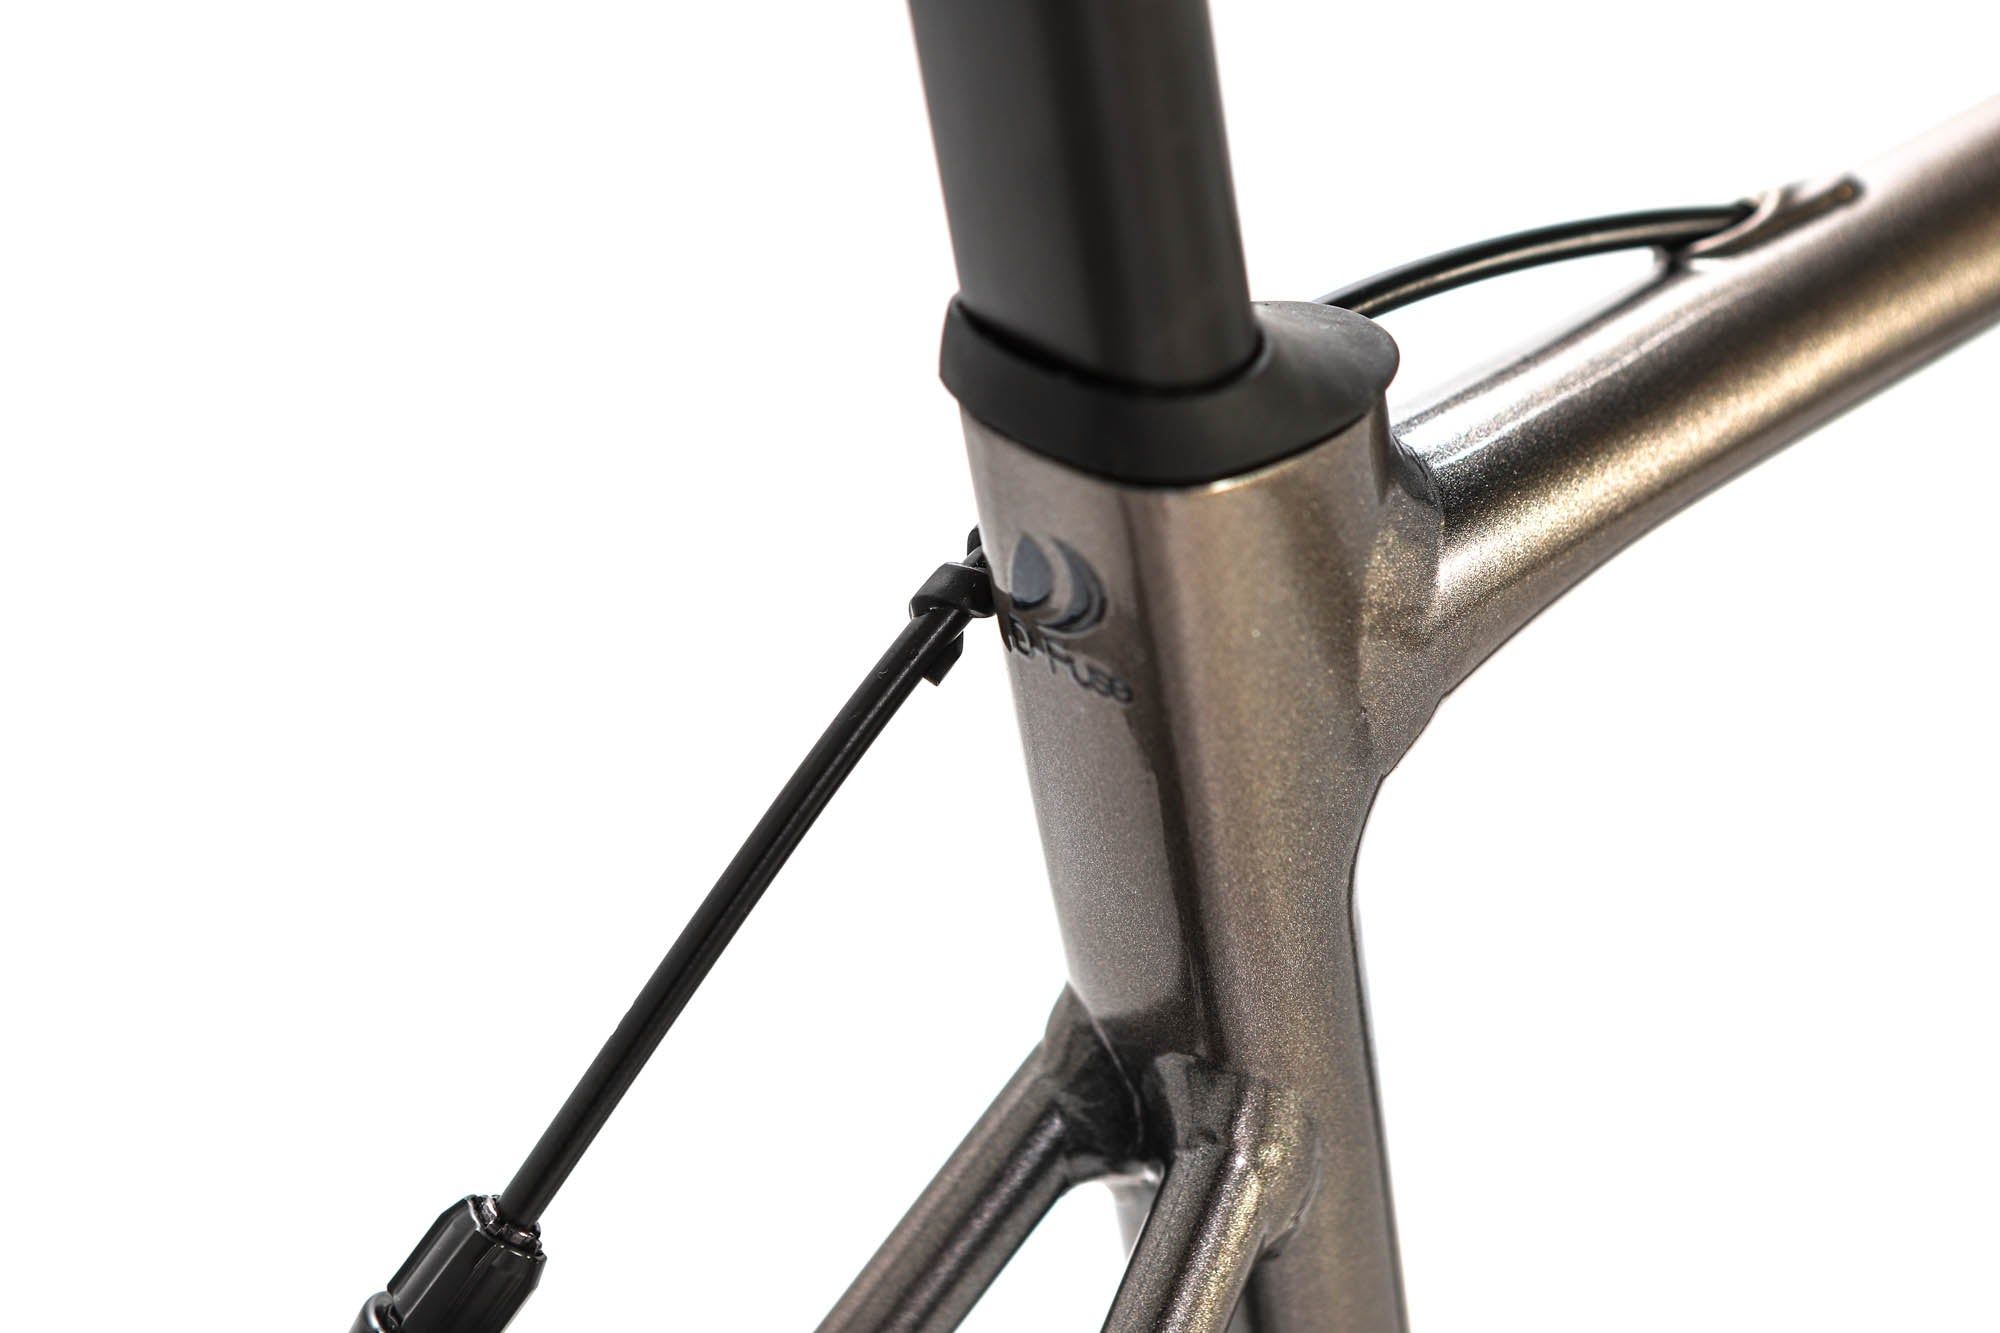 Giant Contend SL1 used in L | buycycle